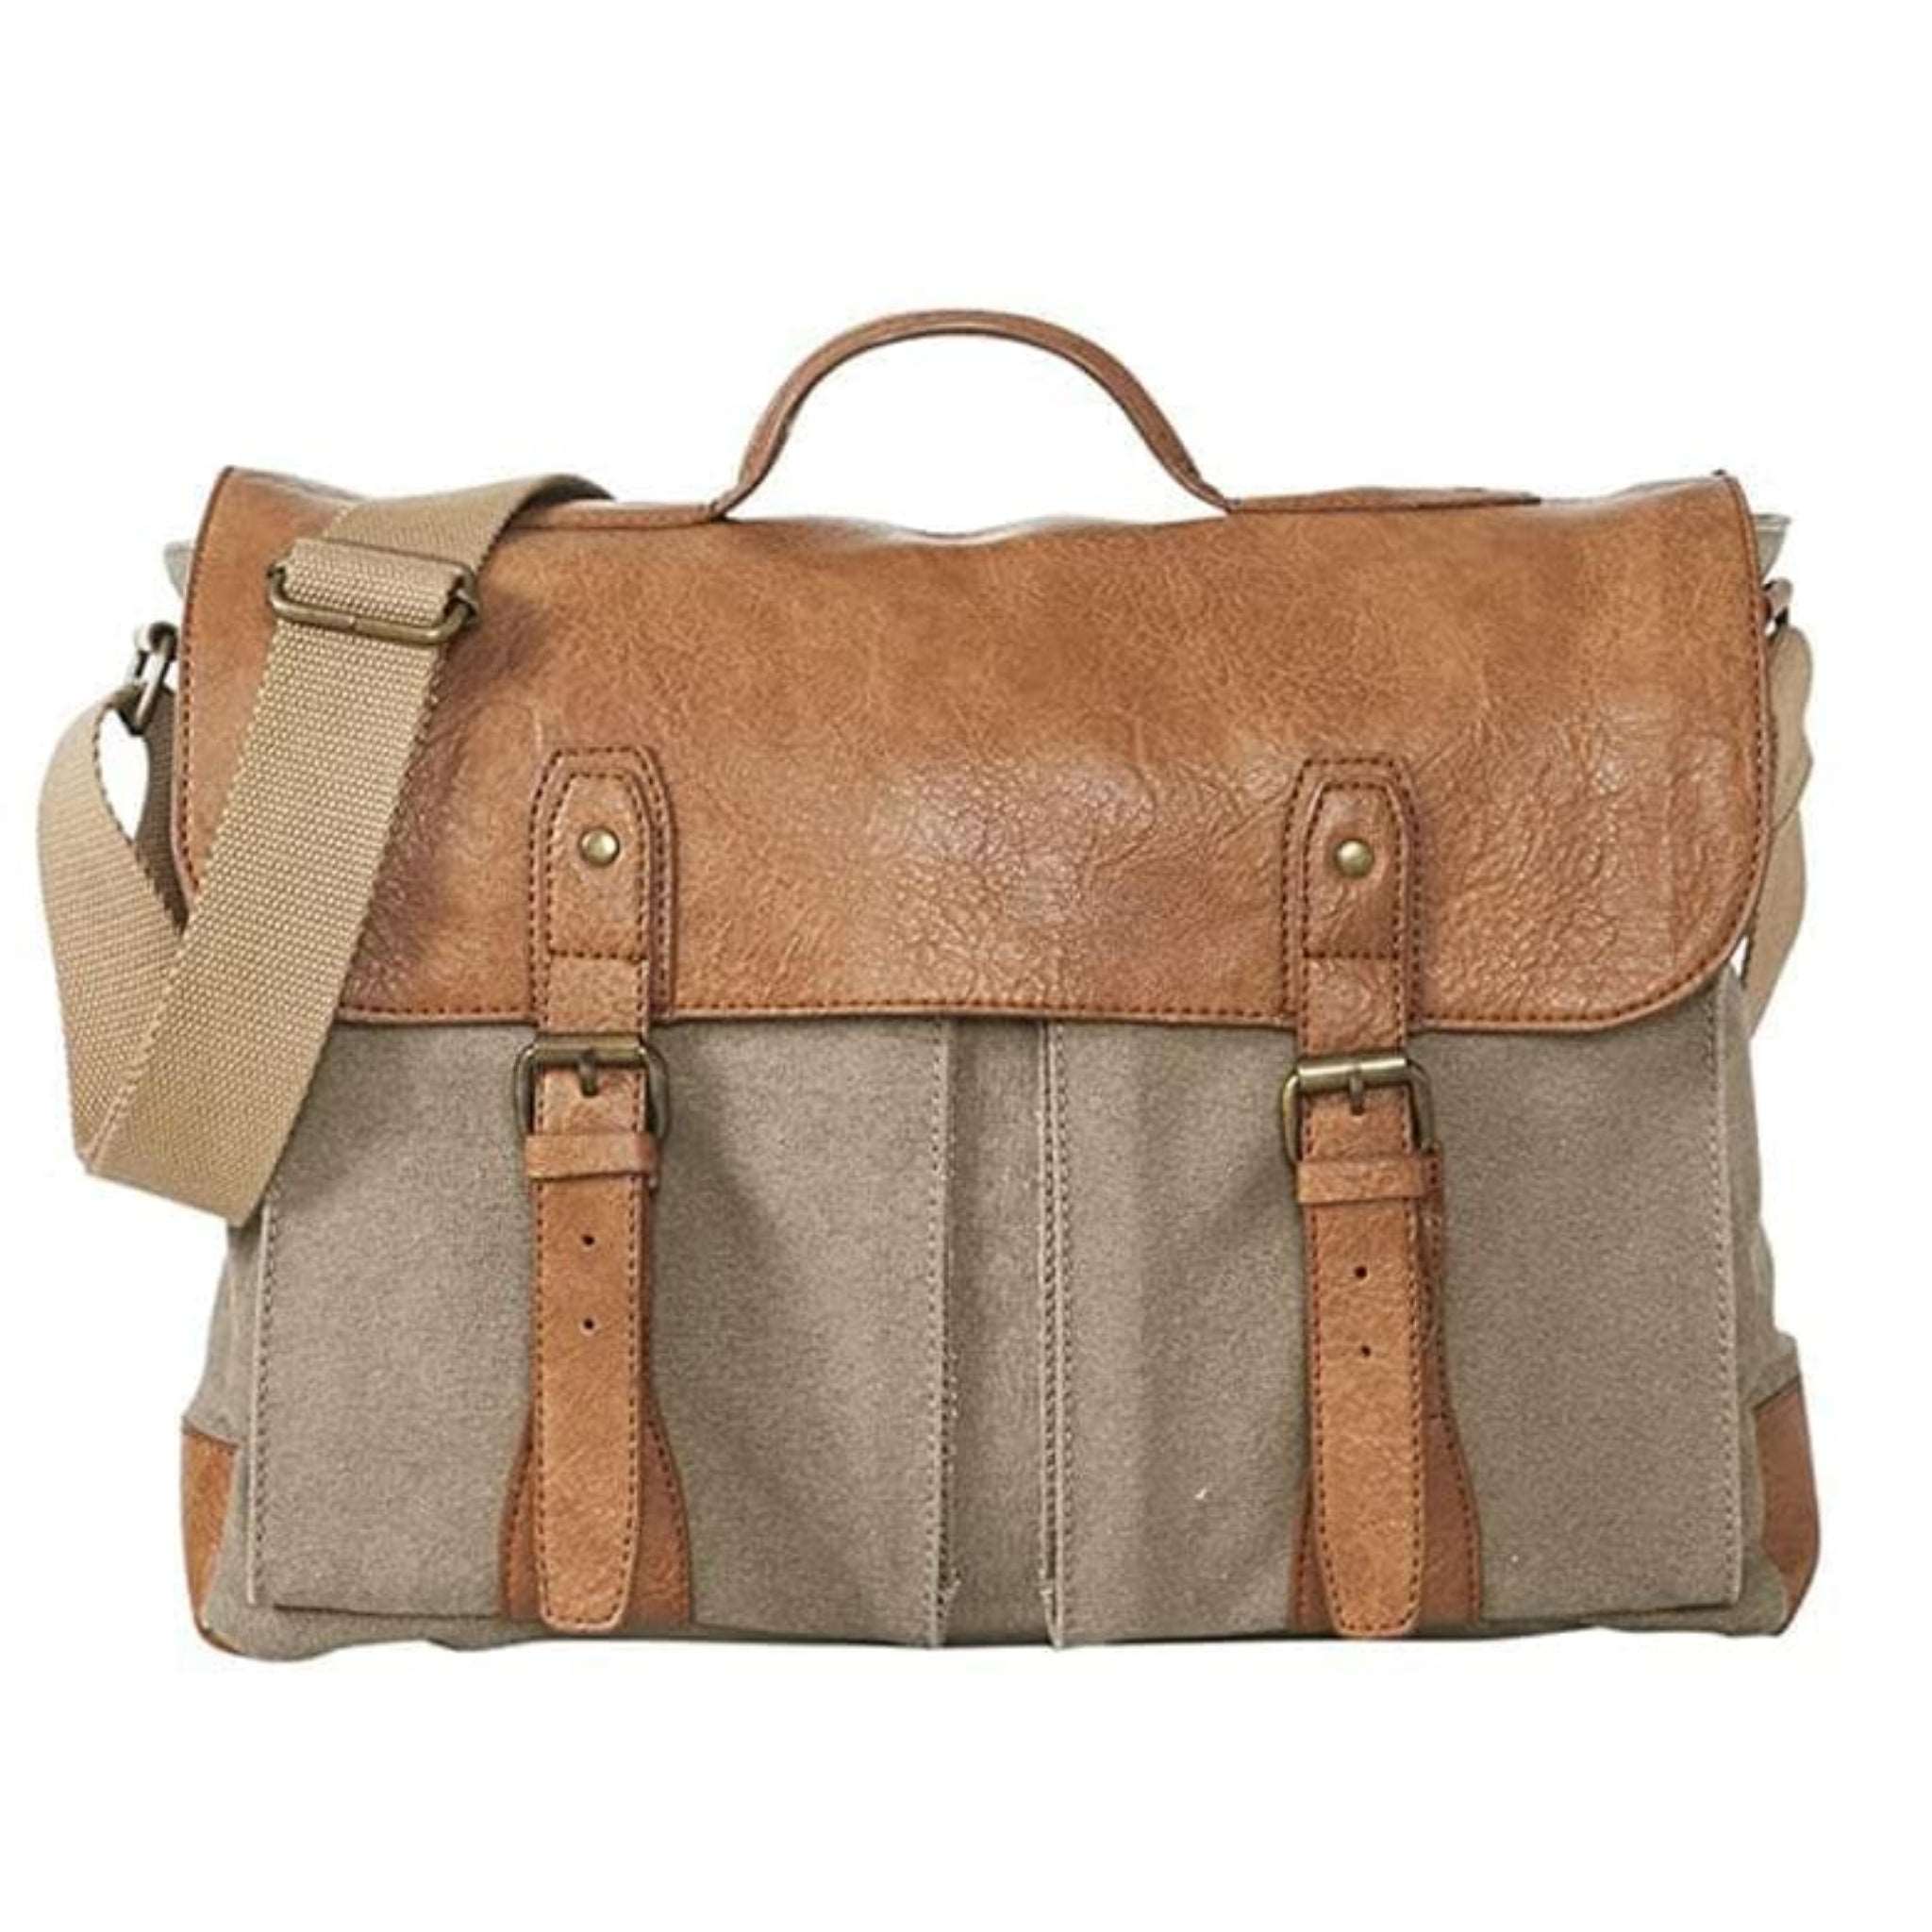 Mona B -Brown 100% Cotton Canvas Messenger Crossbody Laptop Bag for Upto 14" Laptop/Mac Book/Tablet with Stylish Design for Men and Women